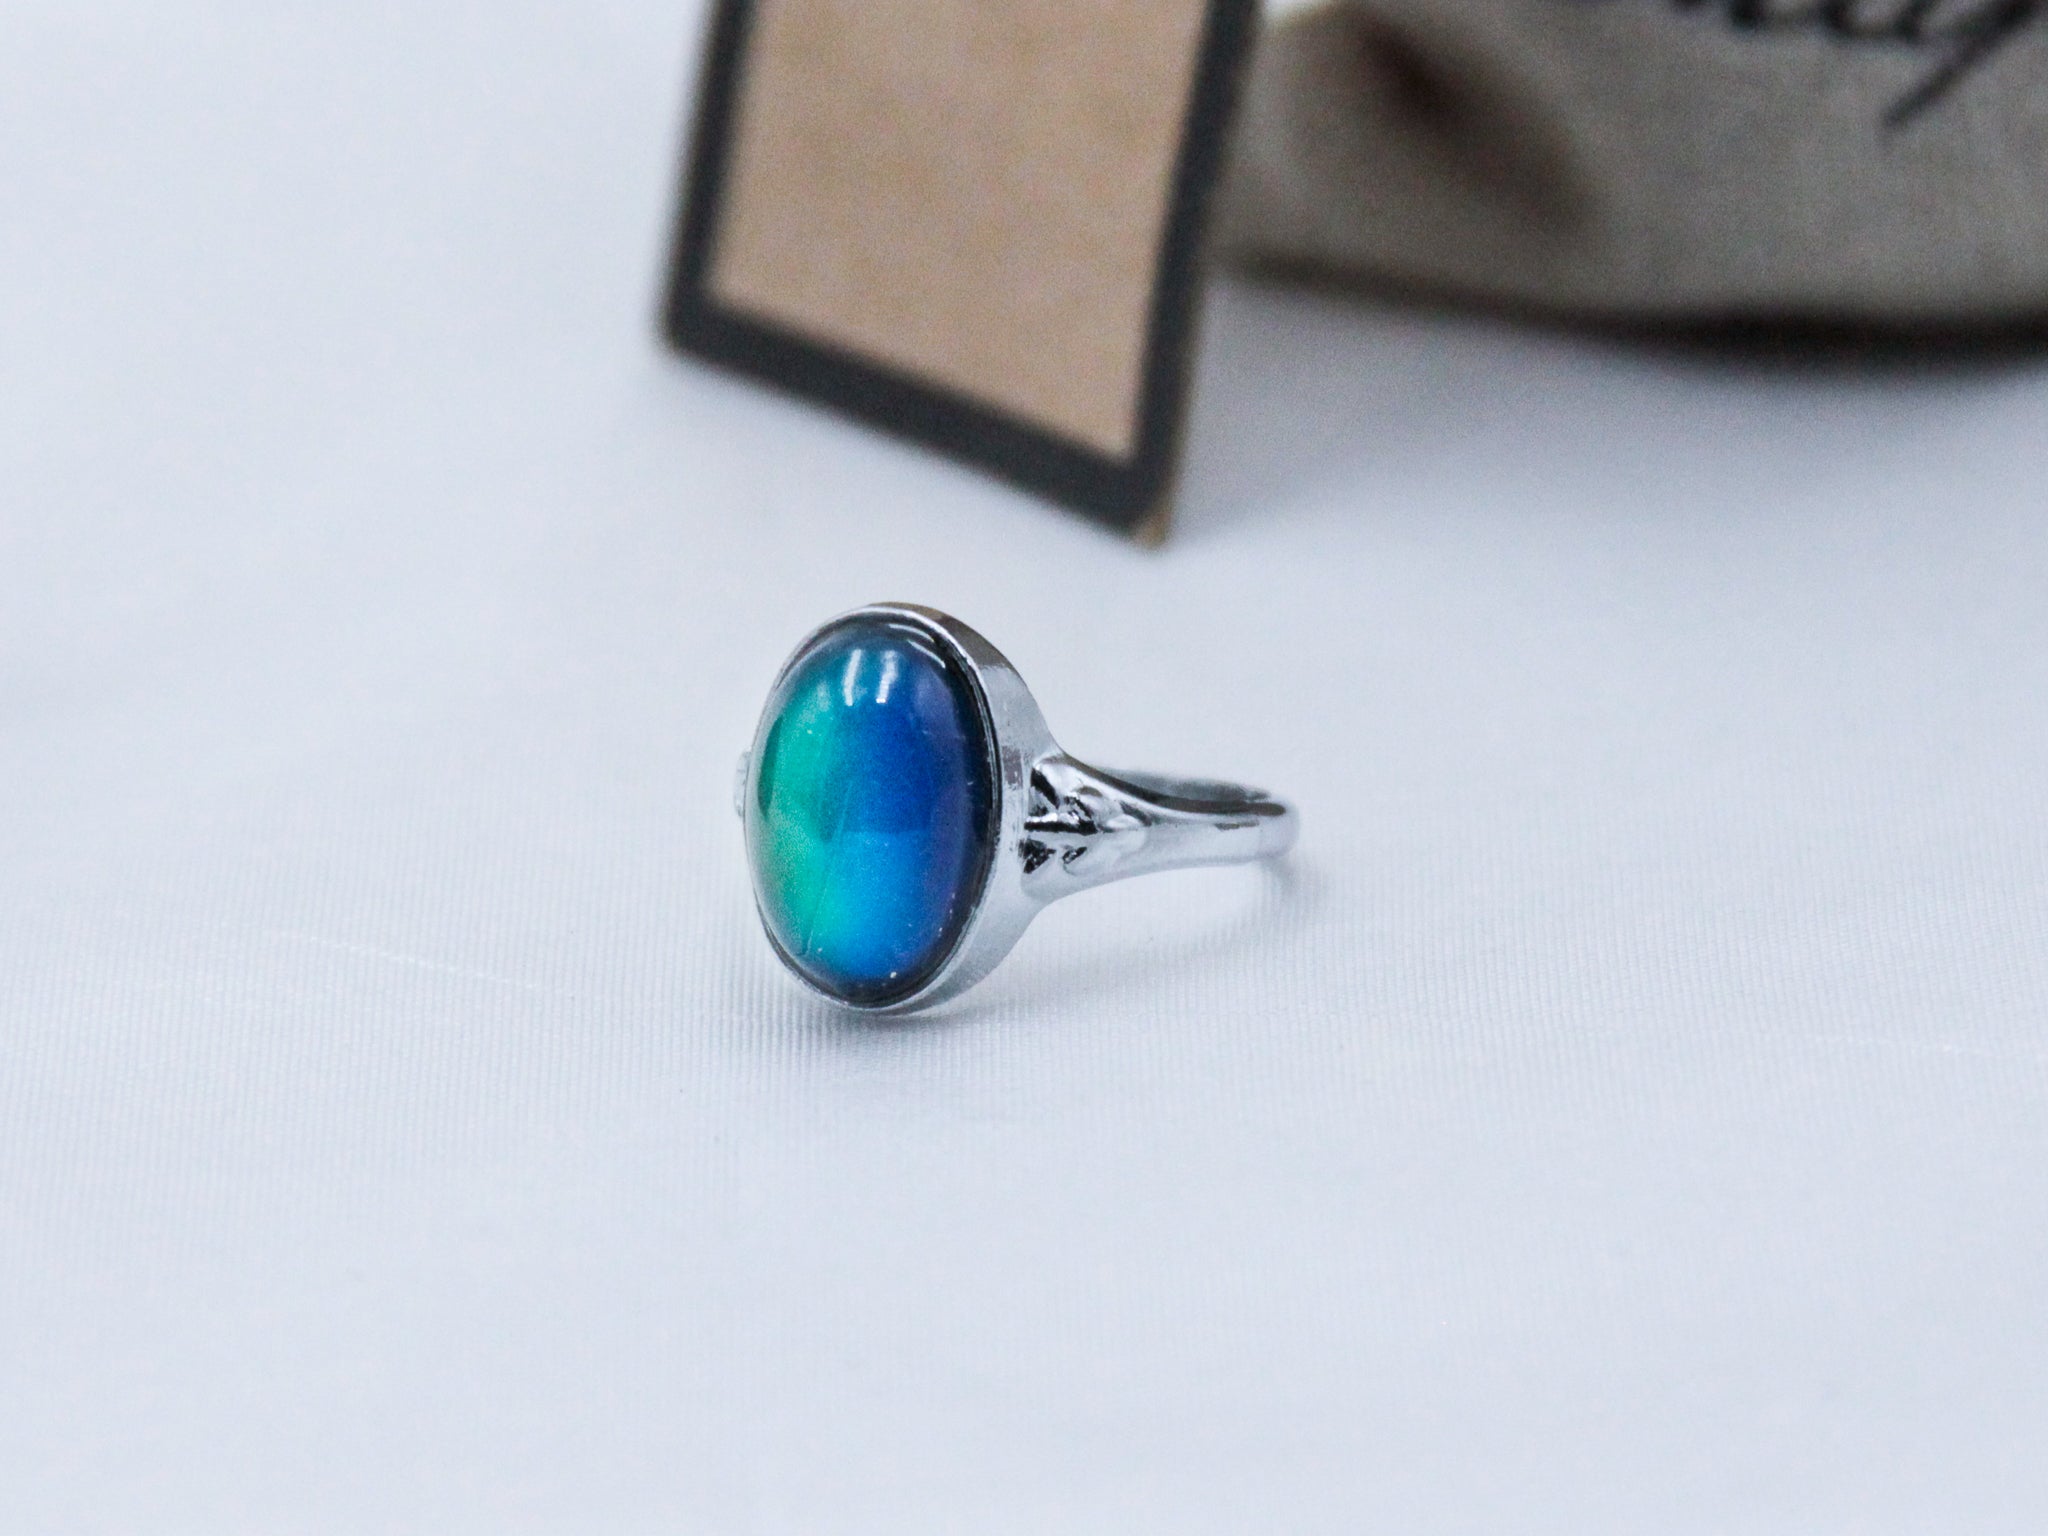 Buy Mood Colour Changing Rings , Fun Colourful, Heat Change, Mood Tracker,  Stainless Steel, Great Fun, Great Gift, Online in India - Etsy